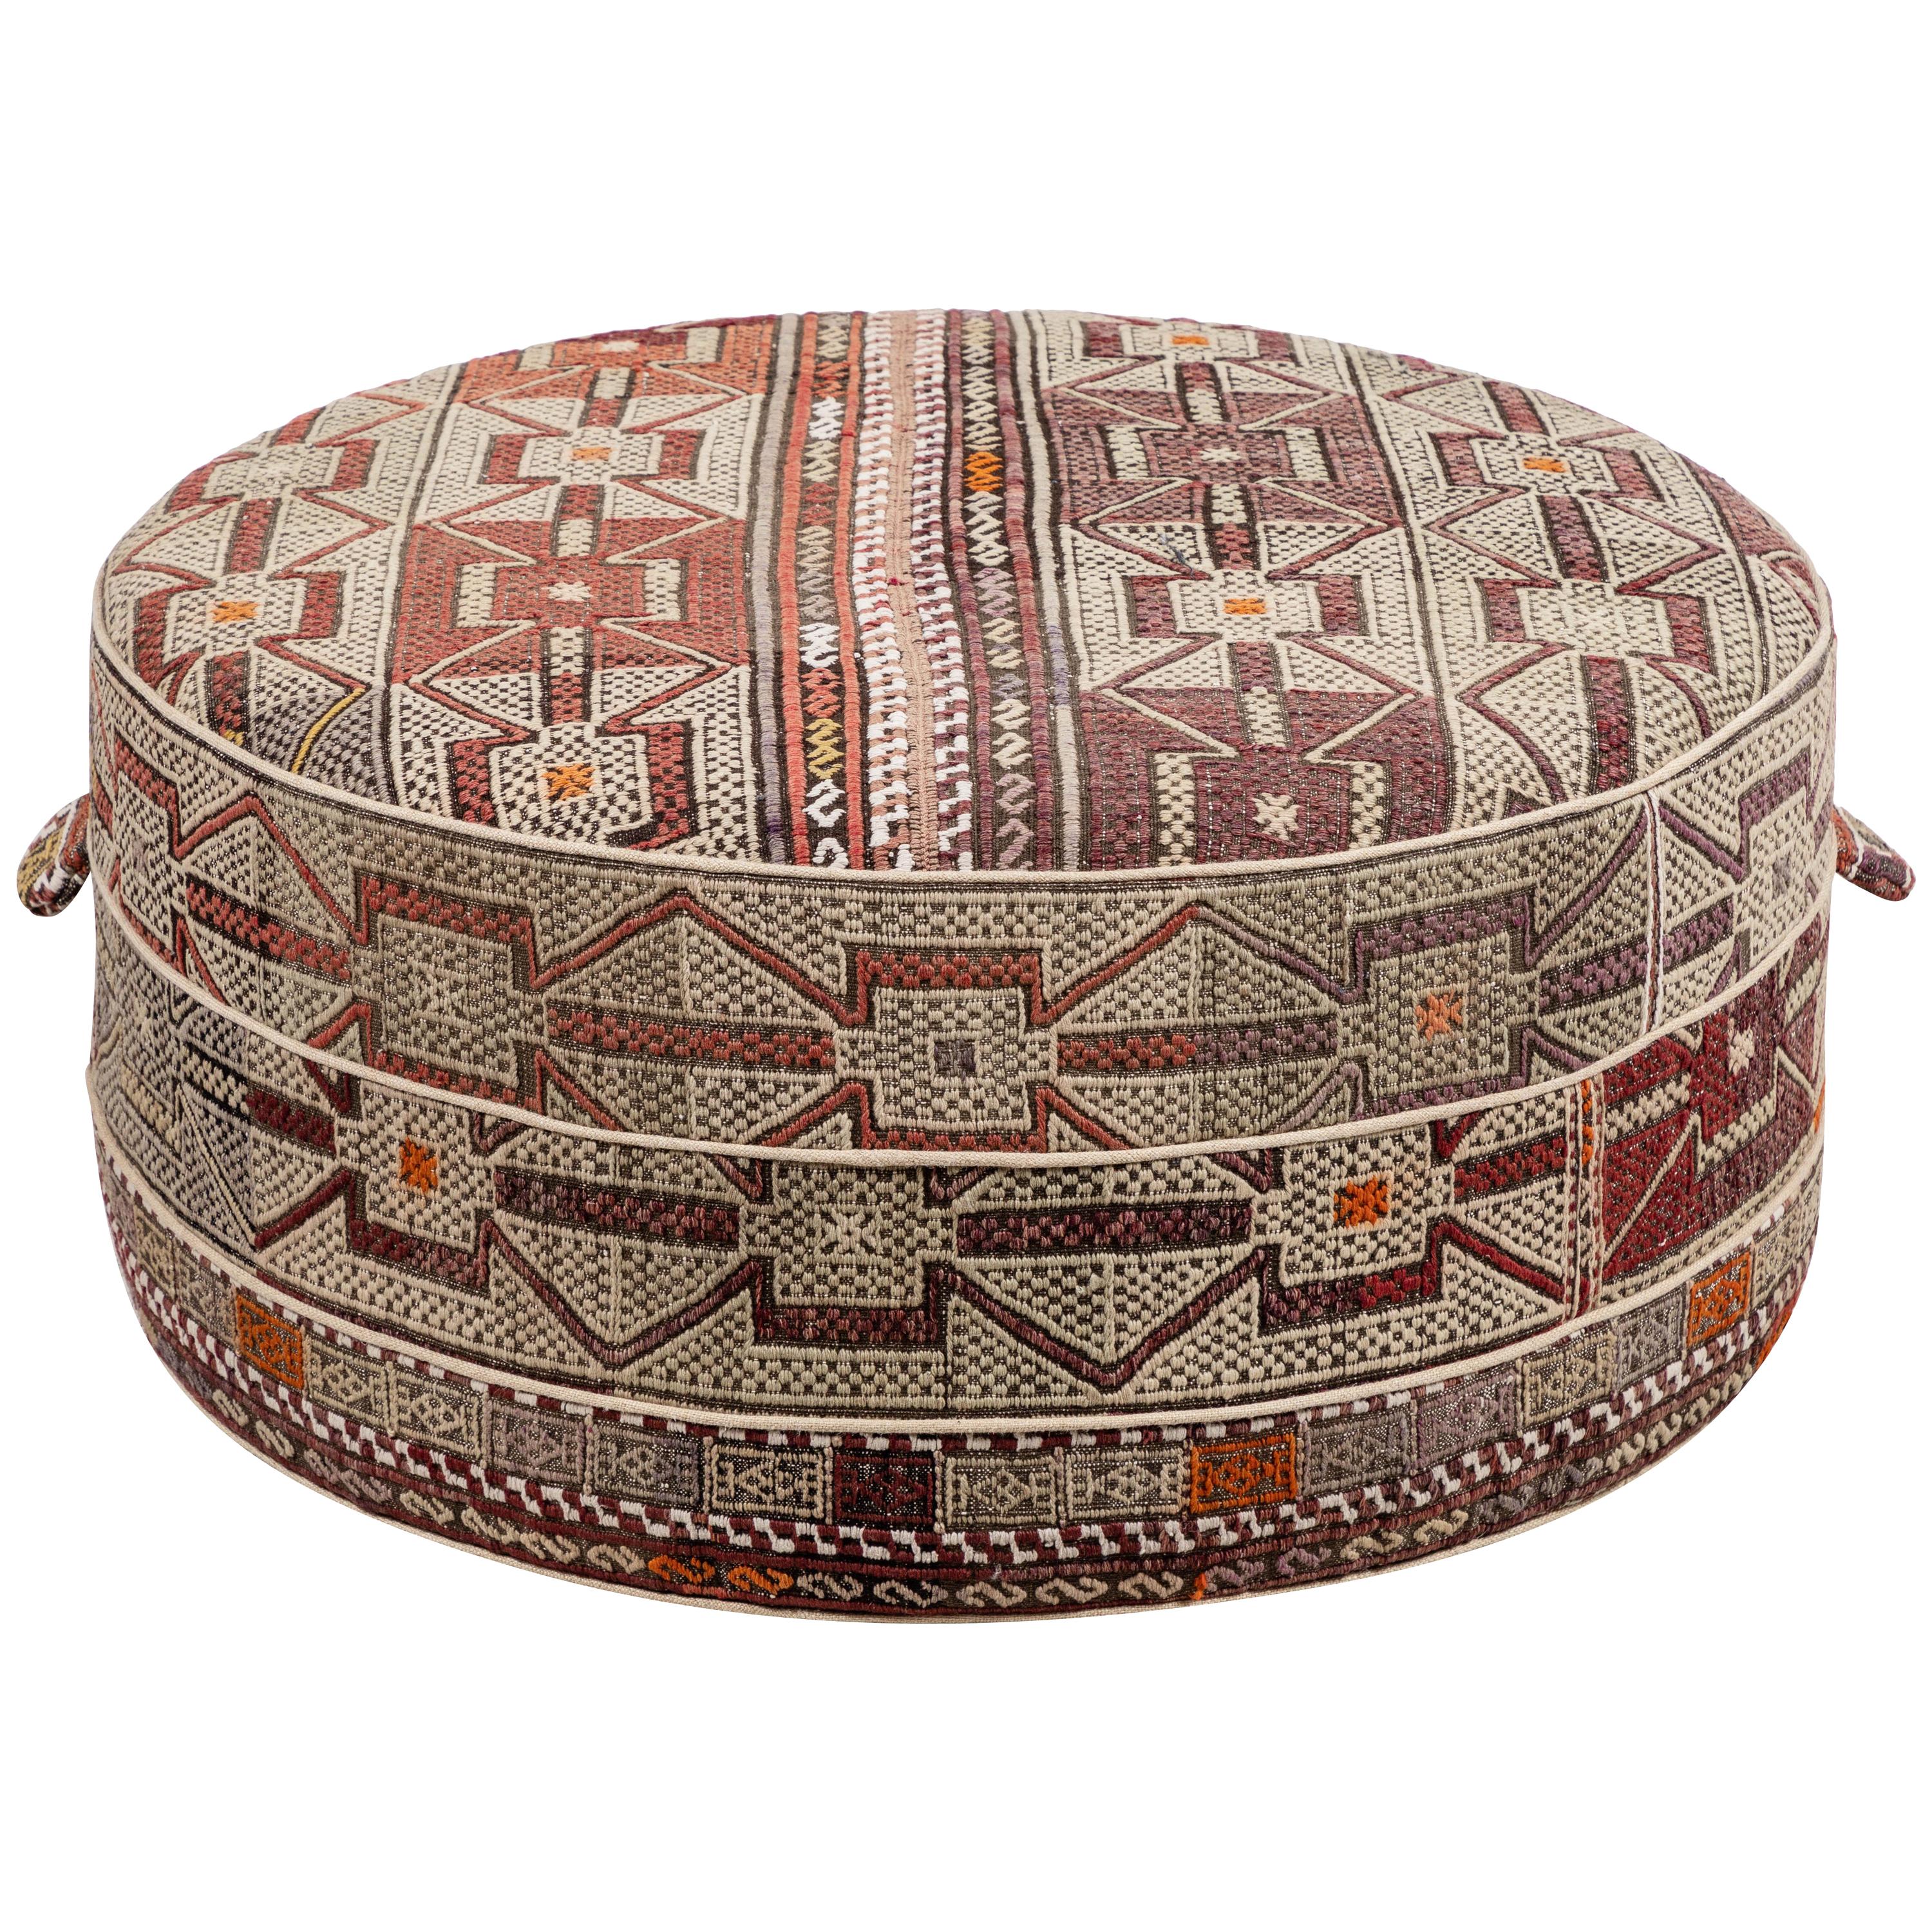 Nickey Kehoe Collection Large Round Ottoman Upholstered in Vintage Rug Textile